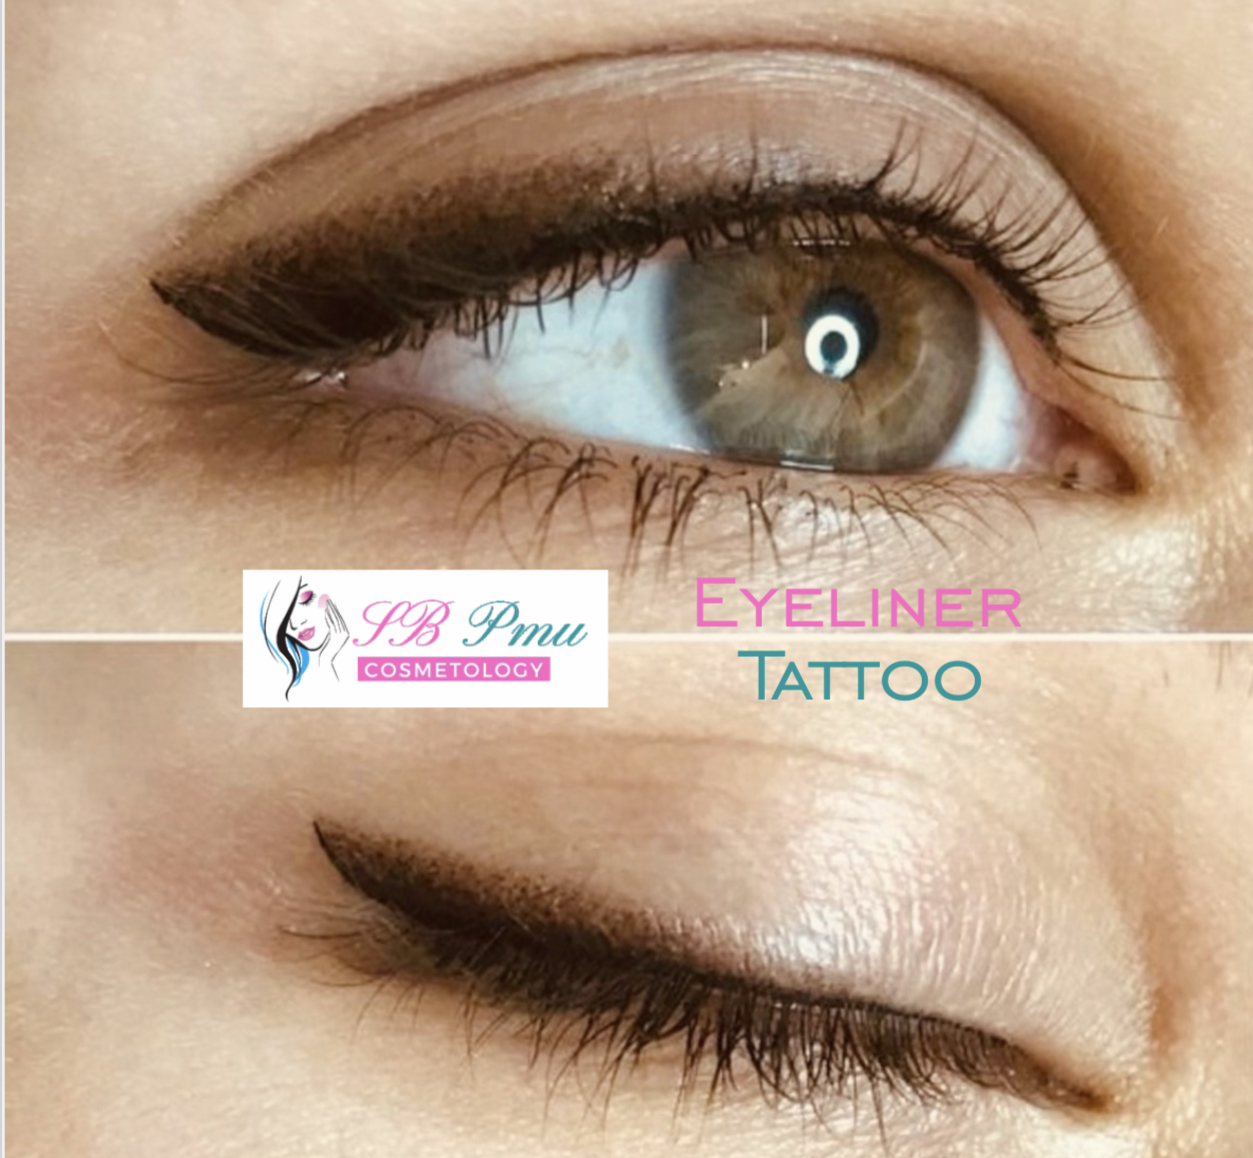 Eyeliner Tattoo Preparation and Aftercare - Lashury